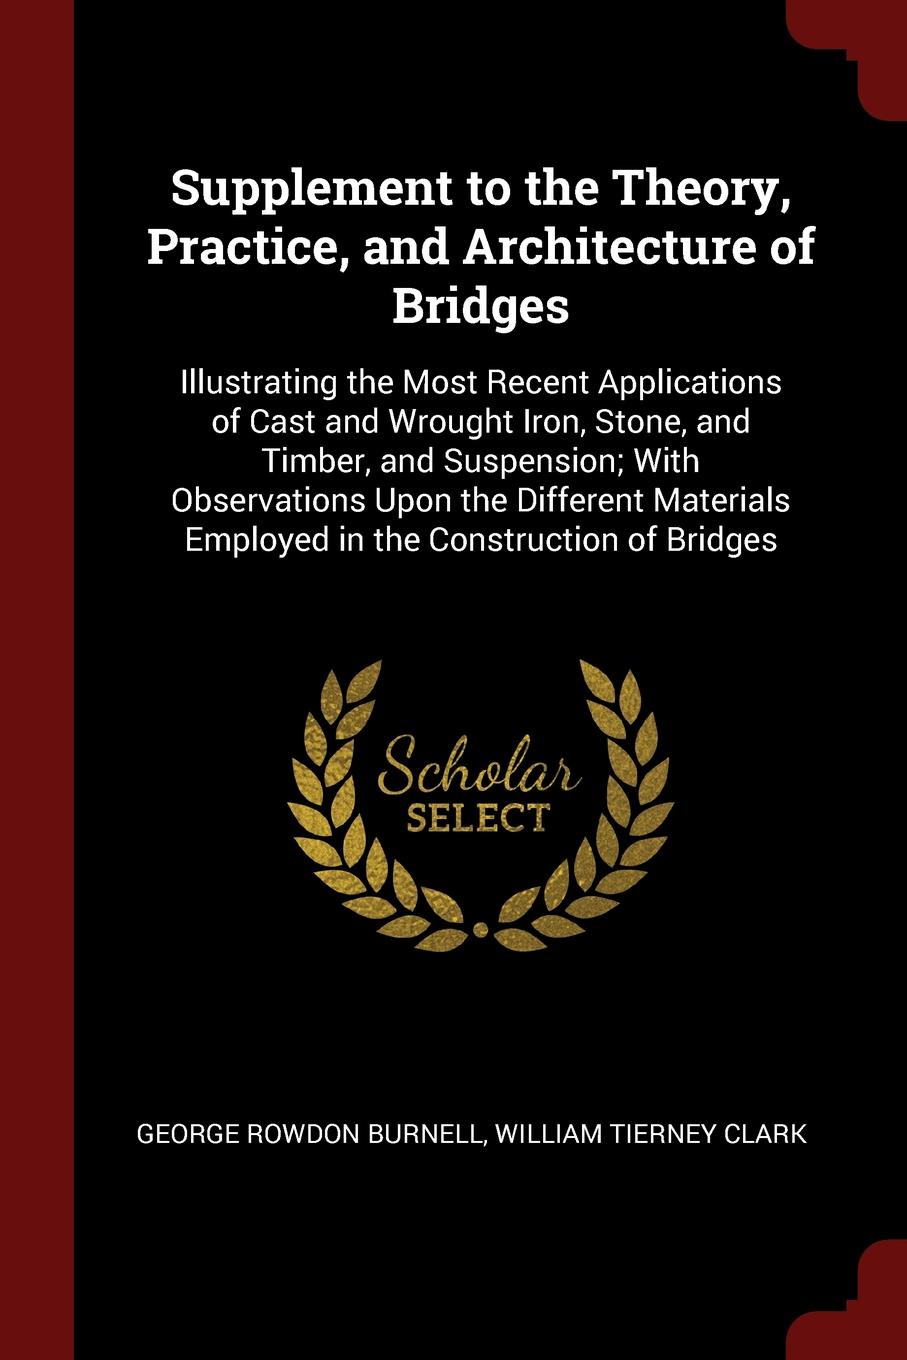 Supplement to the Theory, Practice, and Architecture of Bridges. Illustrating the Most Recent Applications of Cast and Wrought Iron, Stone, and Timber, and Suspension; With Observations Upon the Different Materials Employed in the Construction of ...